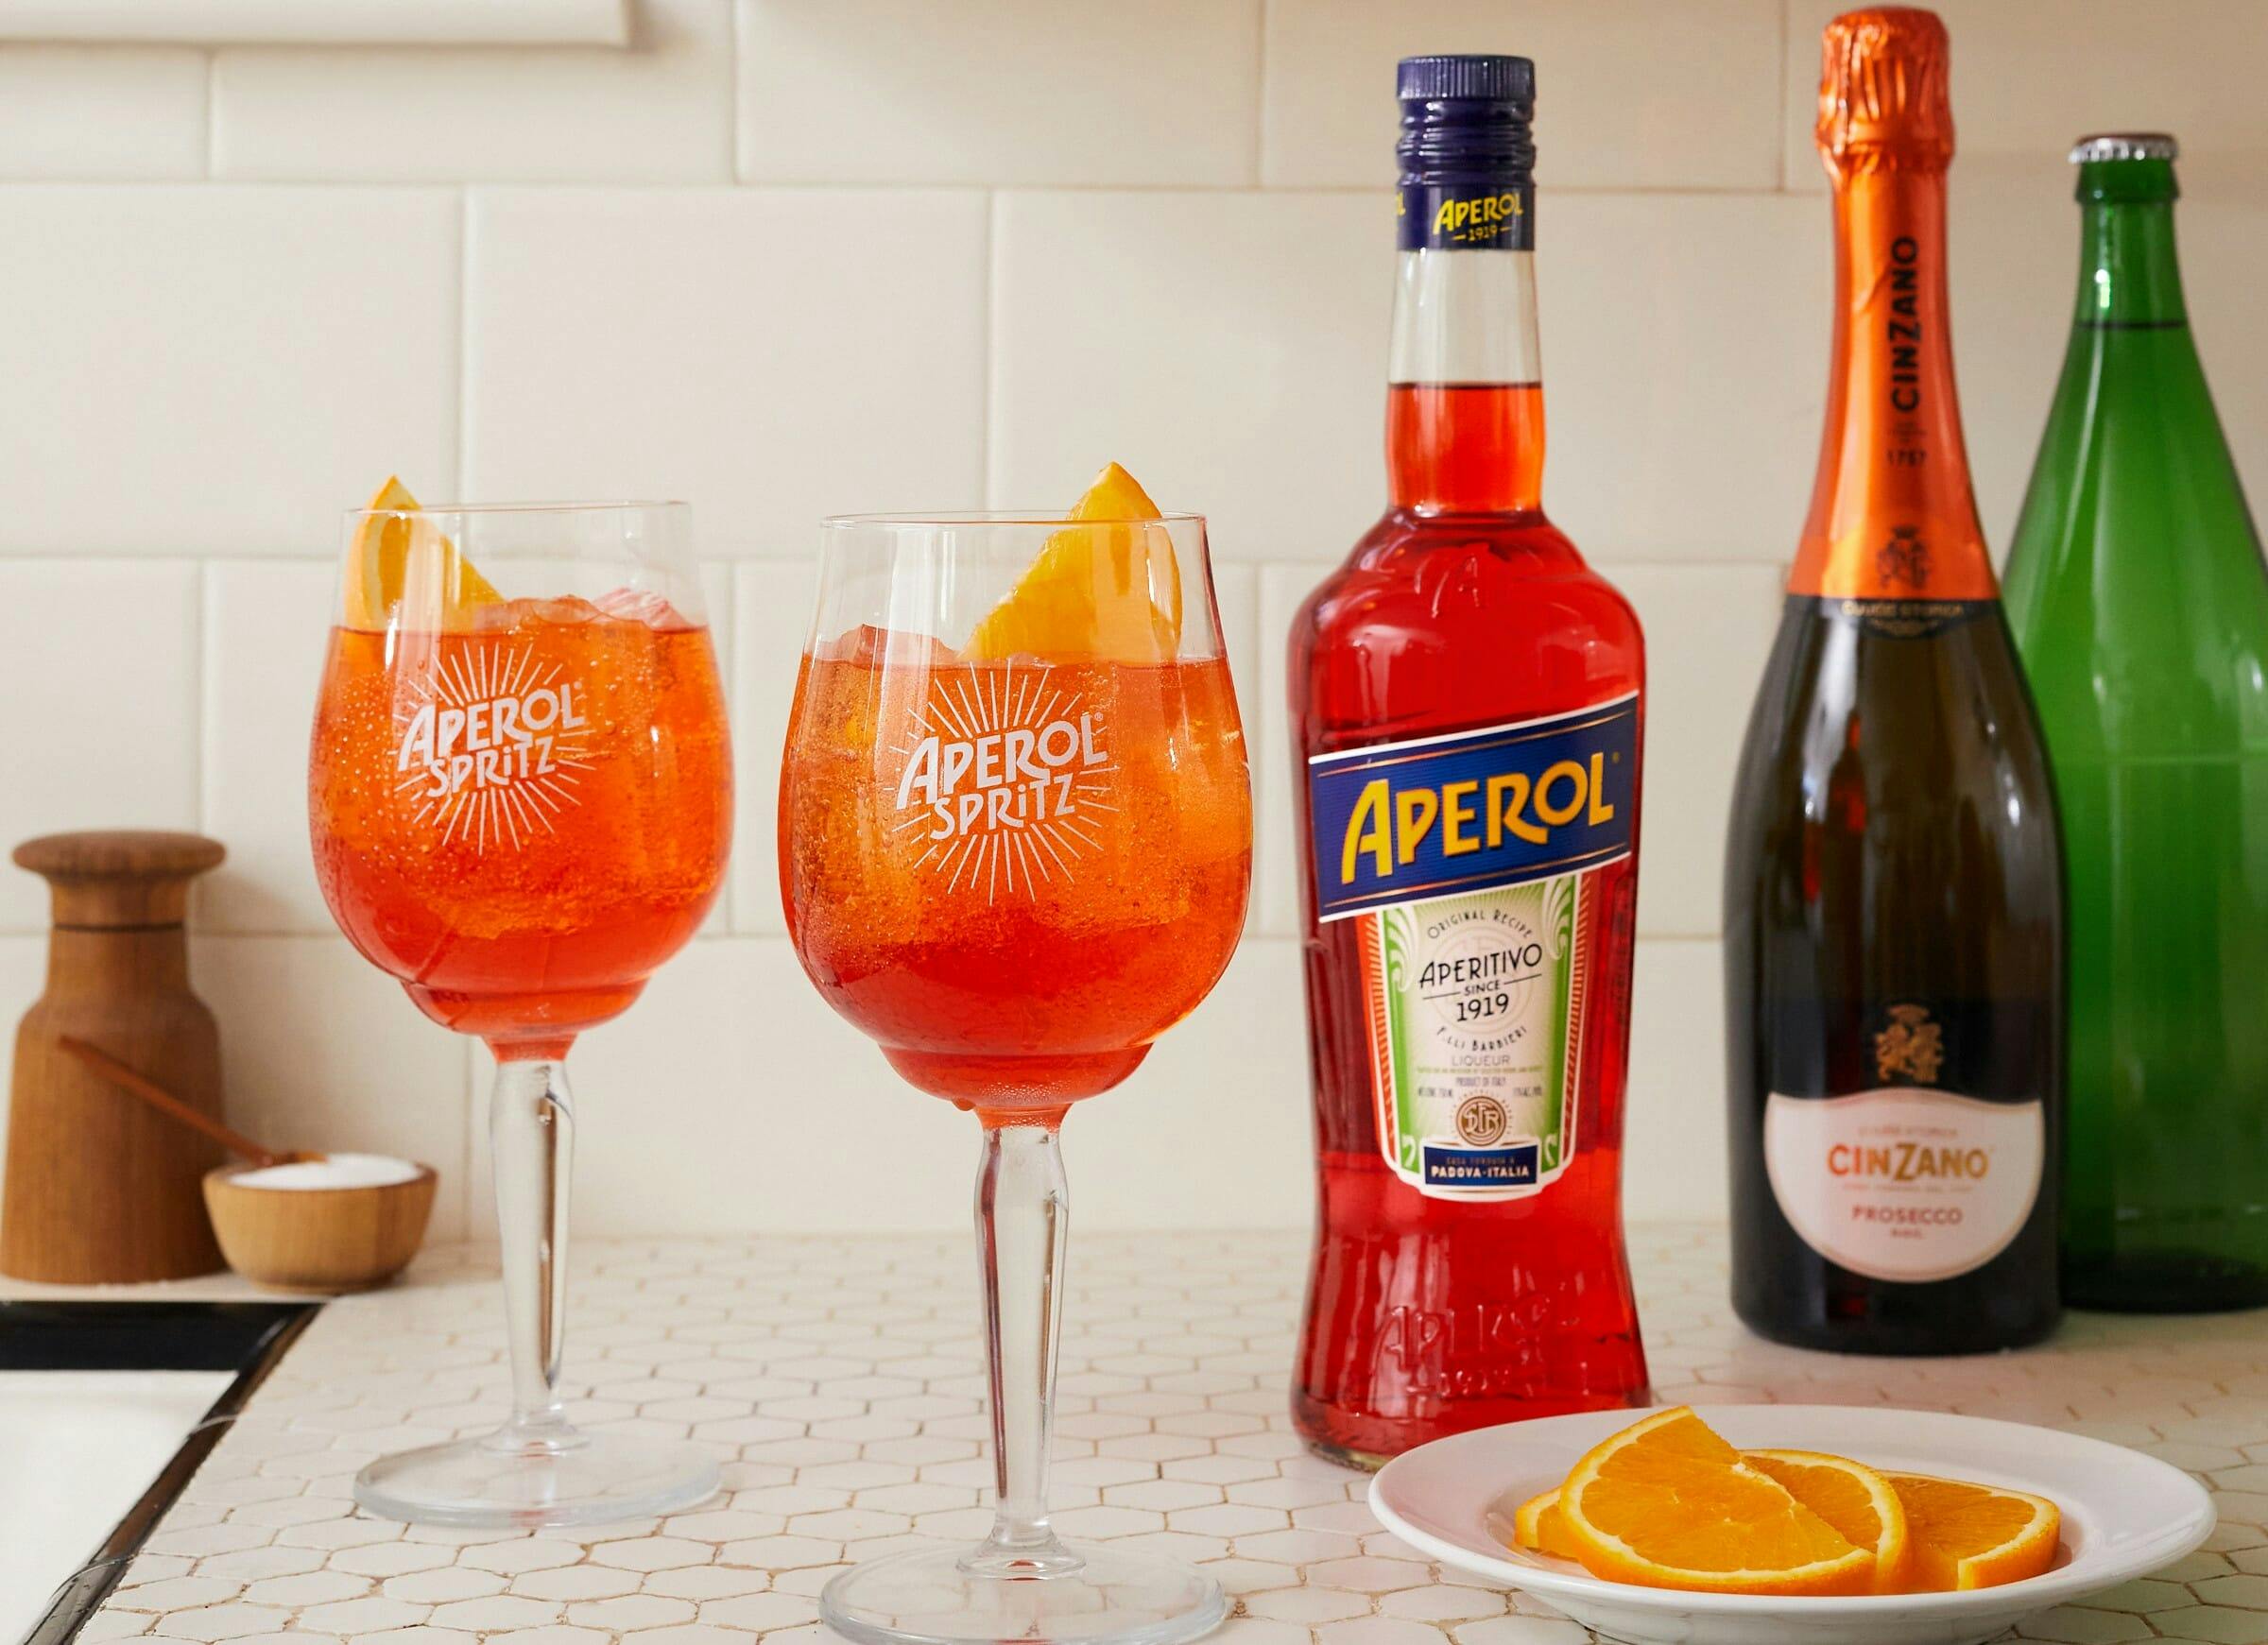 Aperol Tasting Gift Box With 2 Glasses - Apérol